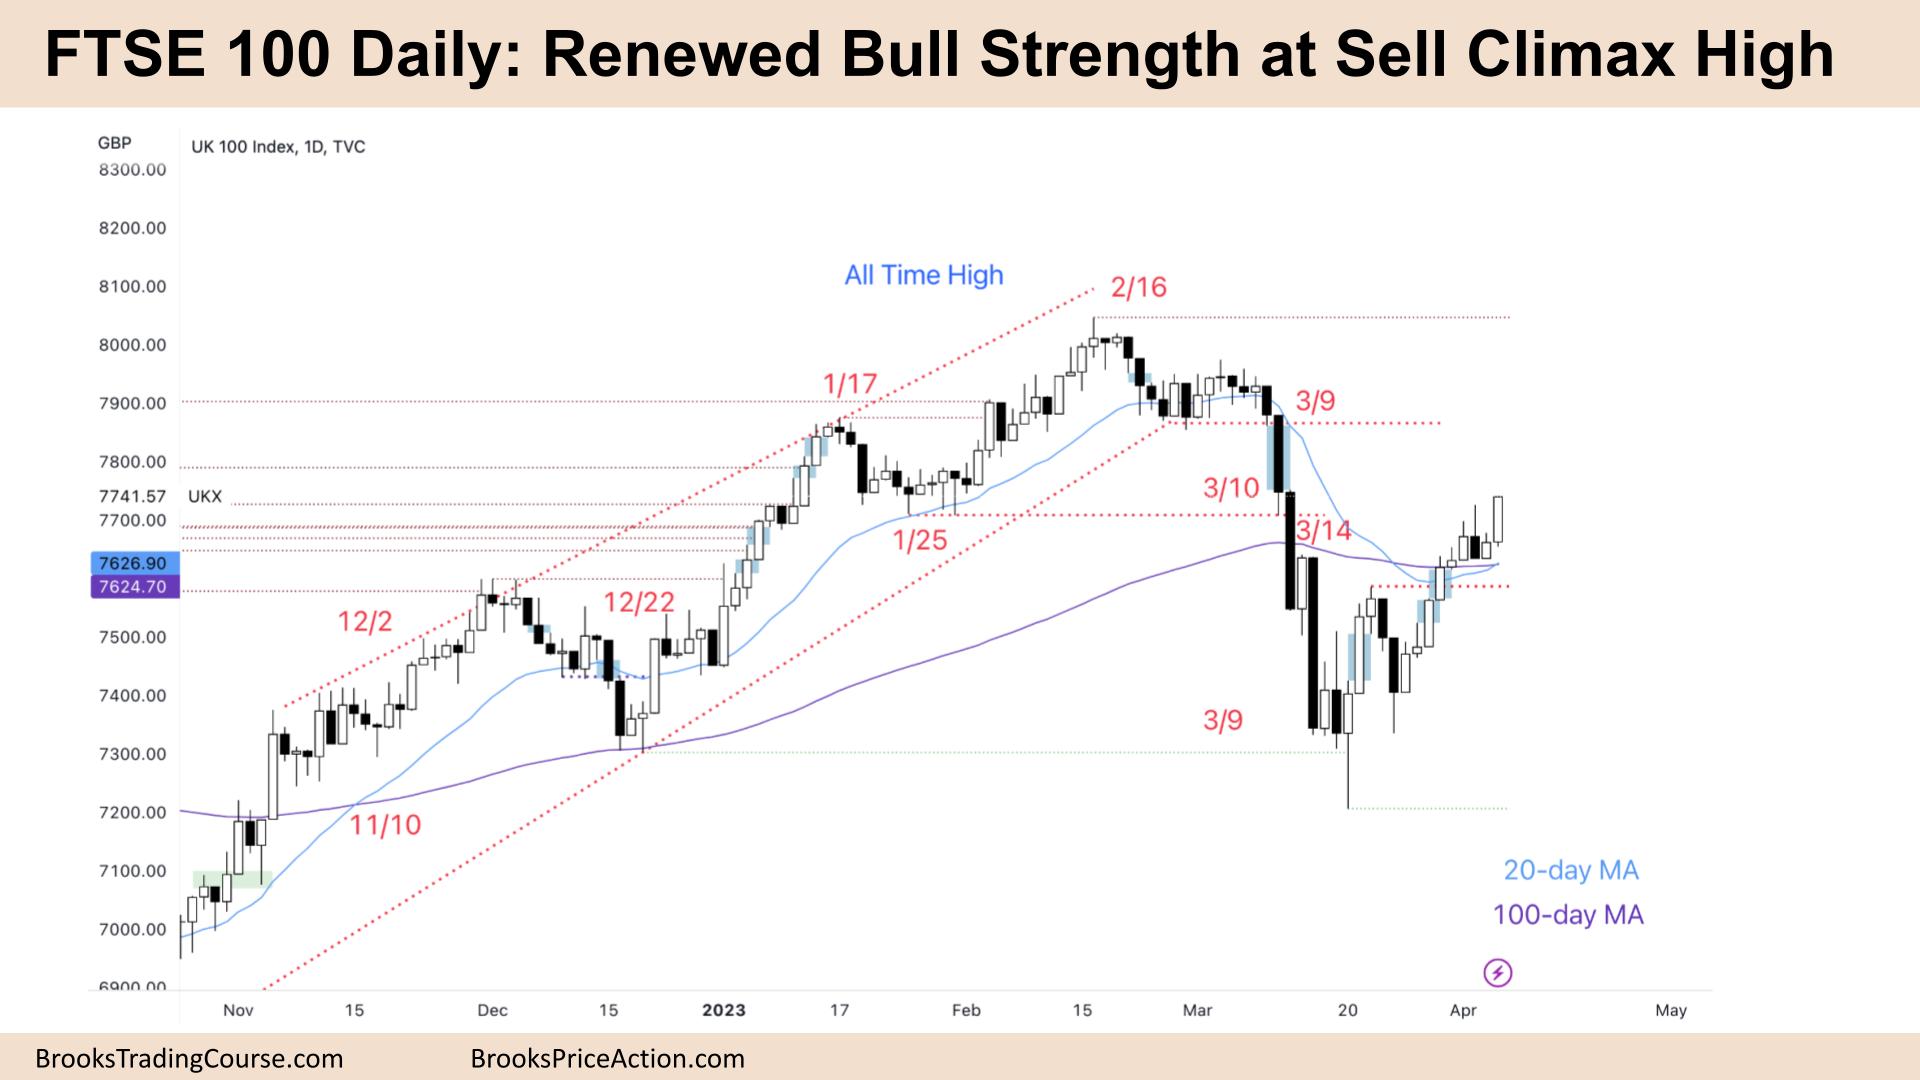 FTSE 100 Renewed Bull Strength at Sell Climax High